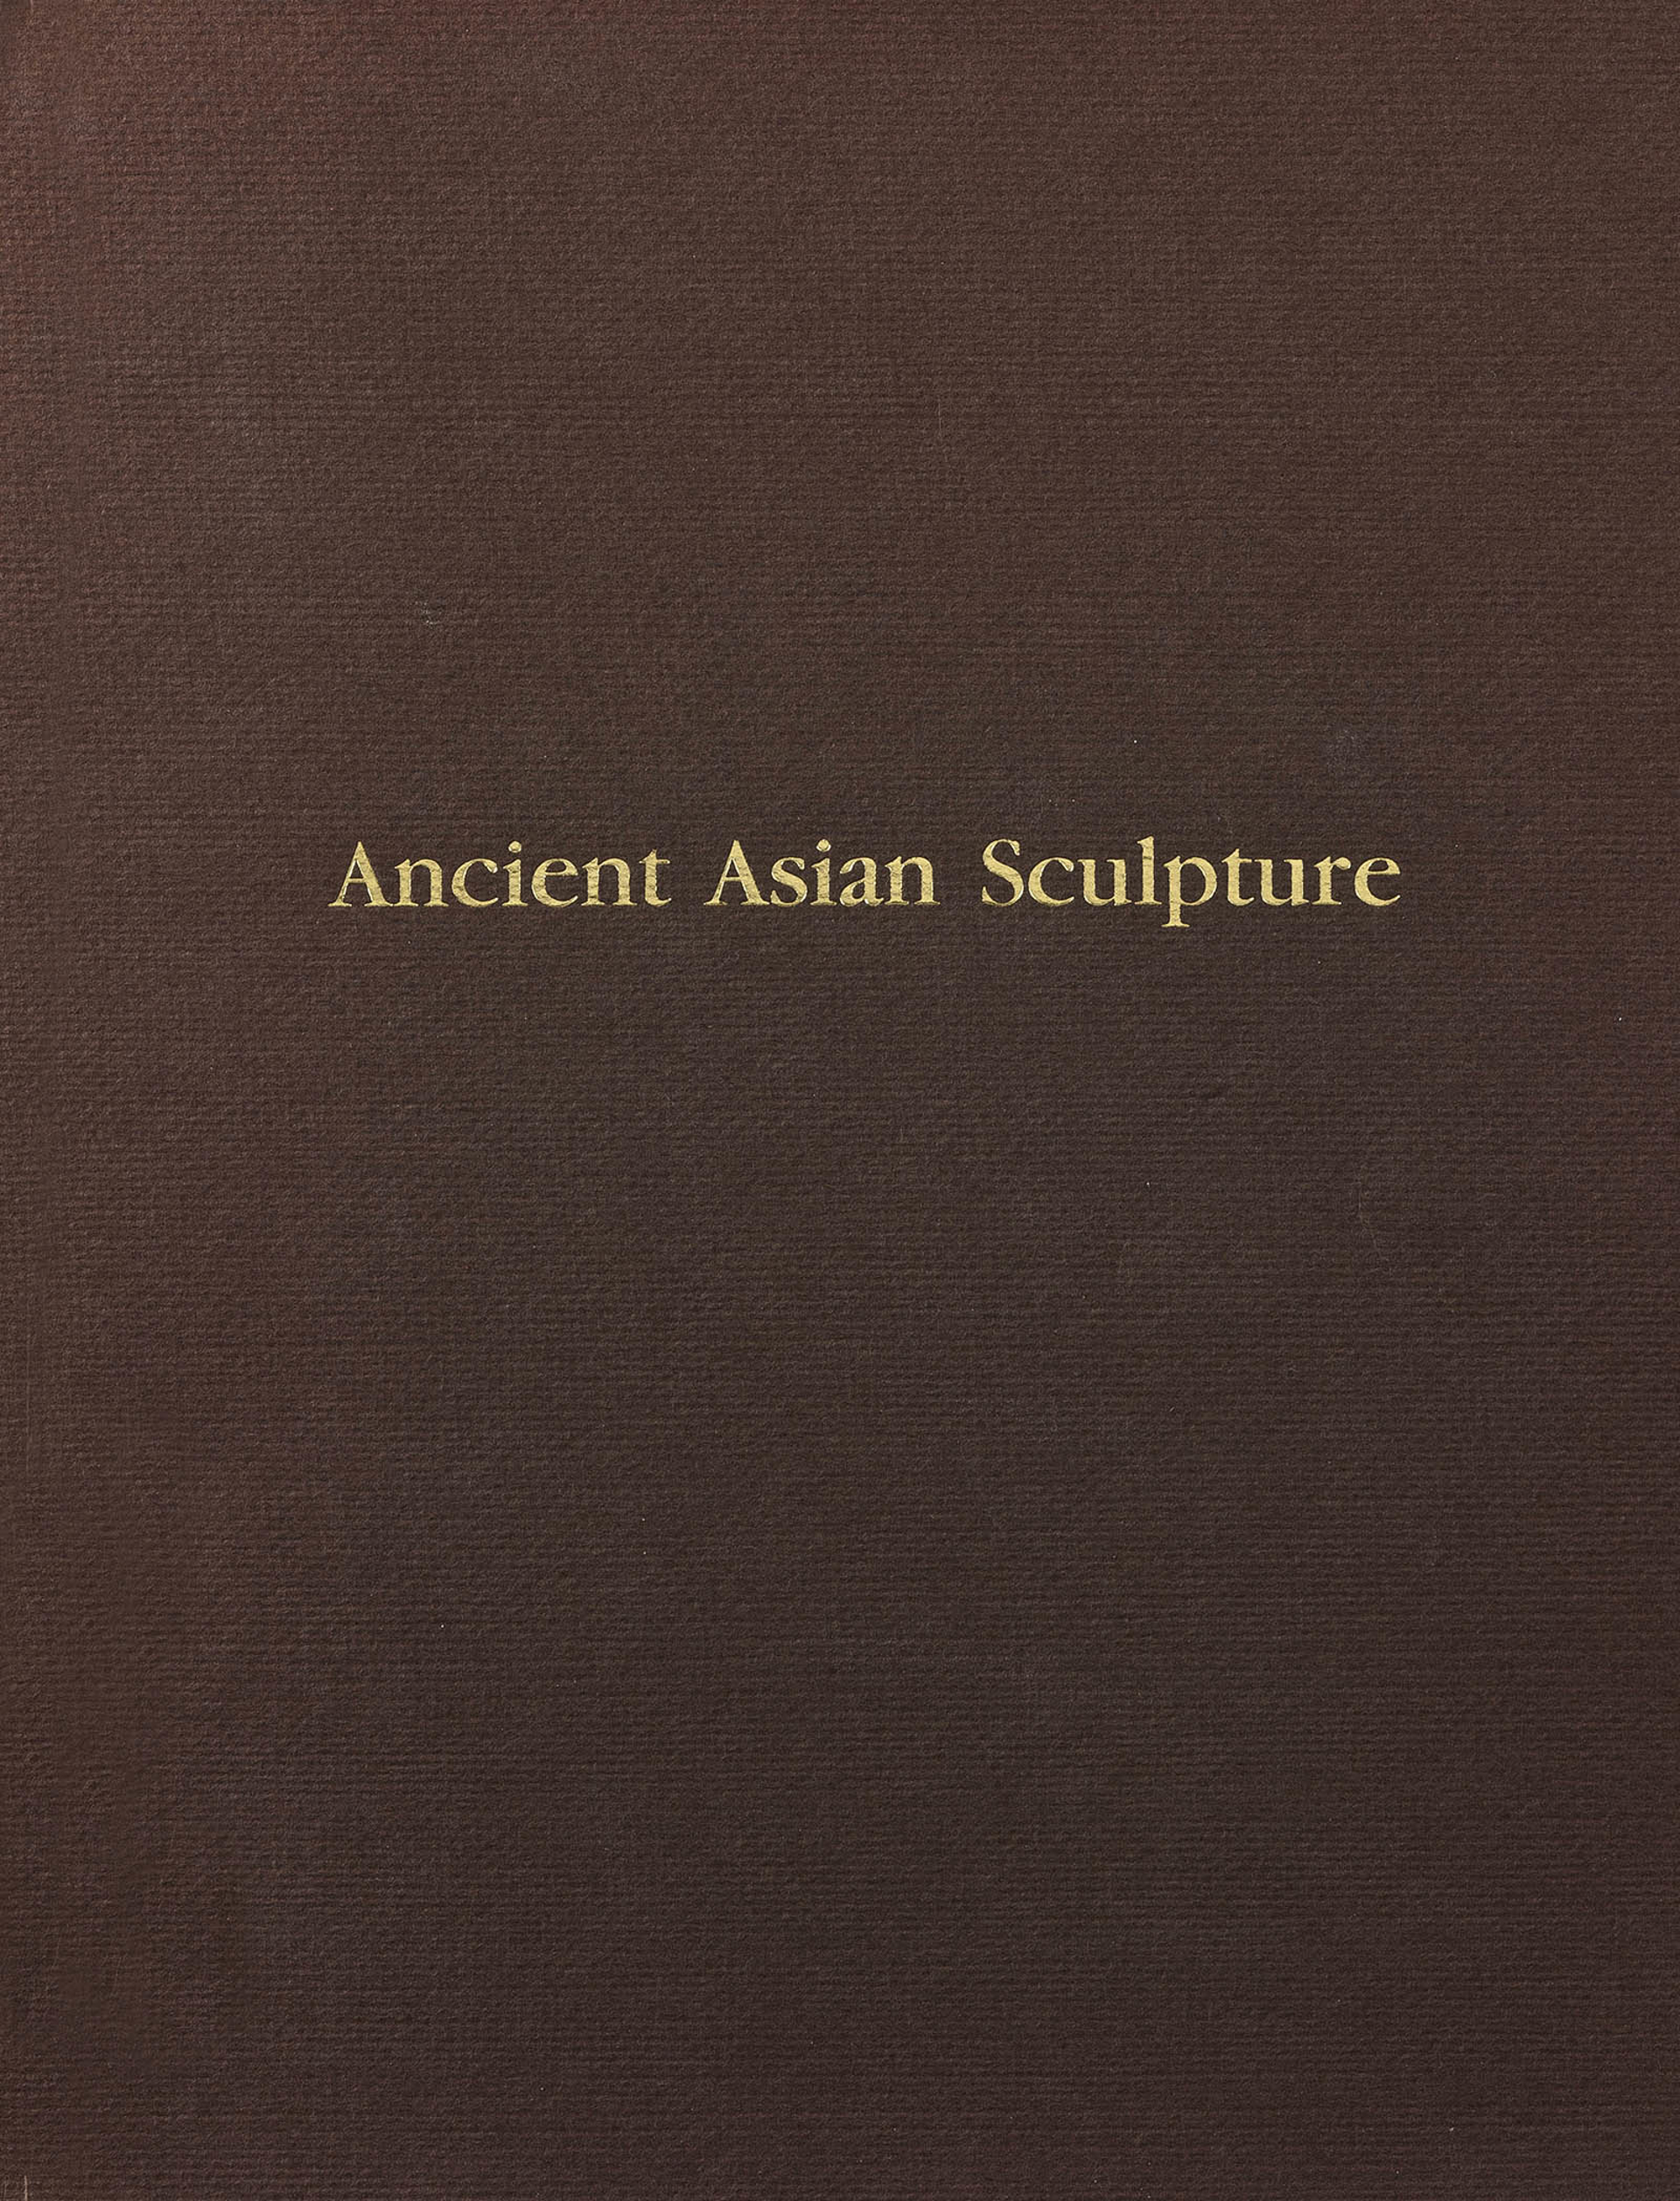 Ancient Asian Sculpture (out of print) by Catalog 06